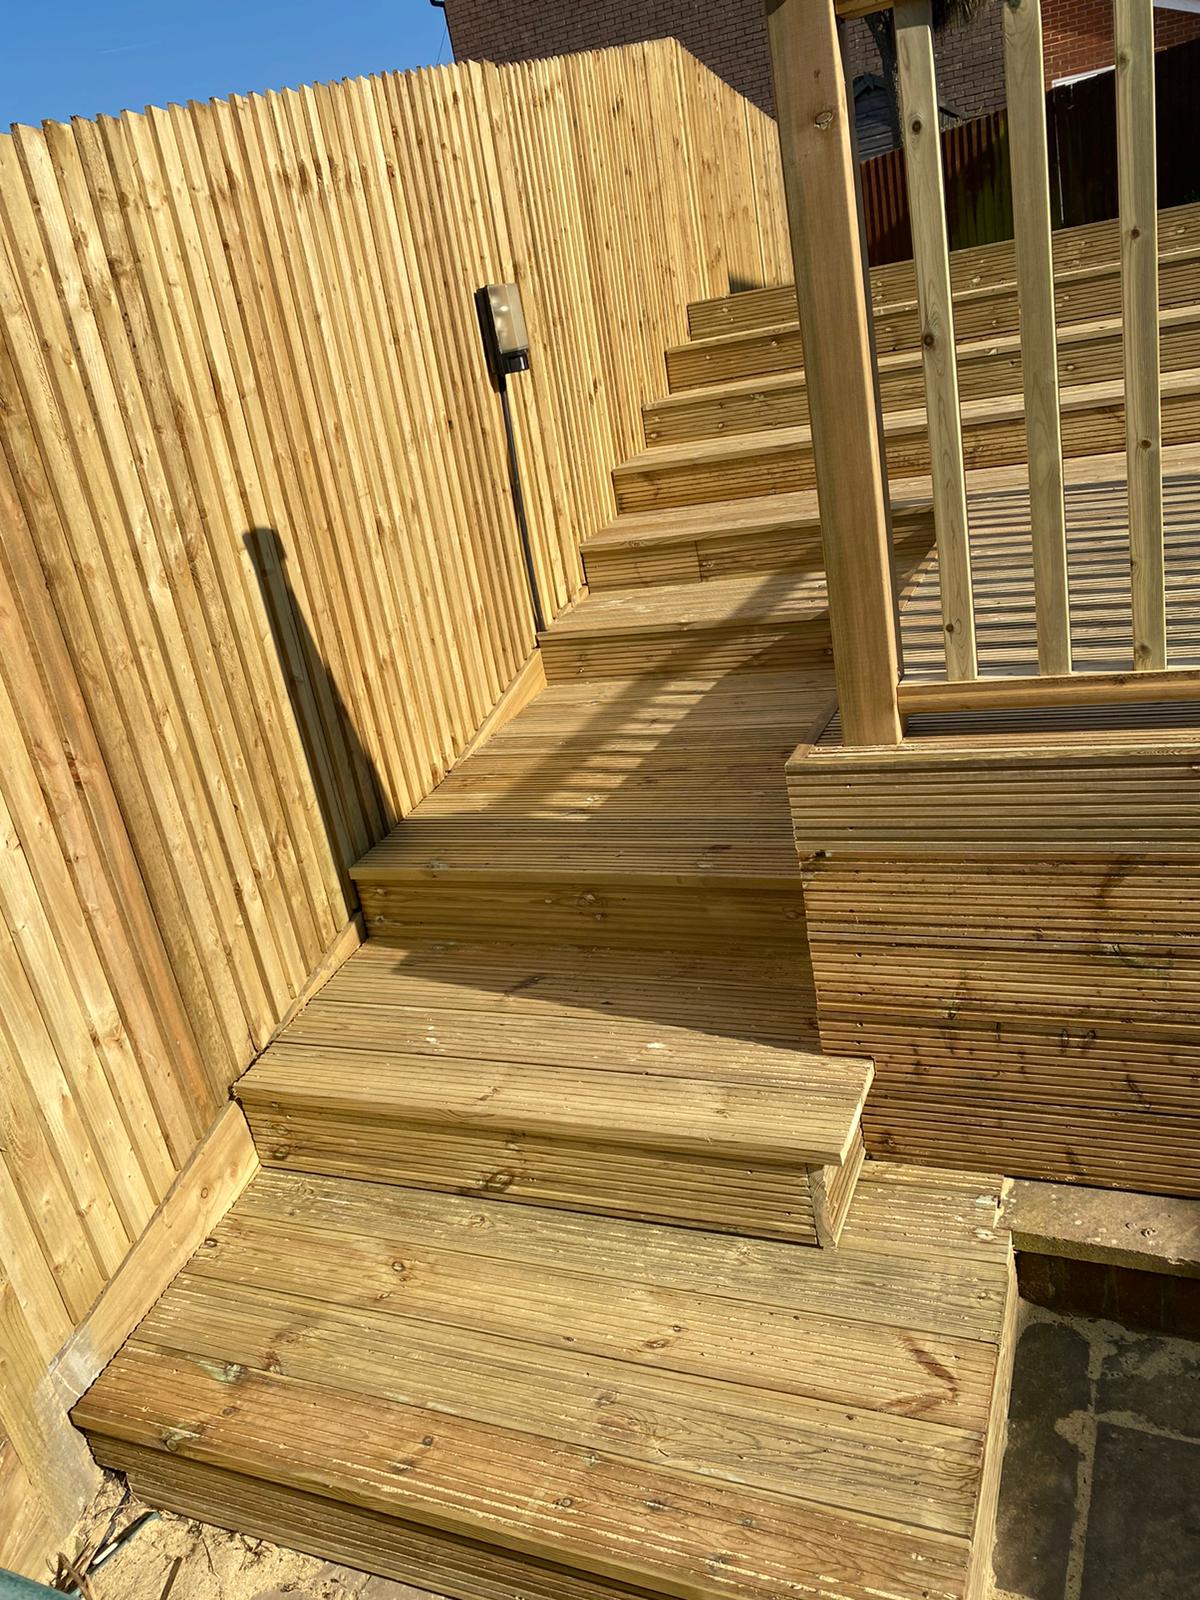 WHAT IS THE MEANING OF DECKING?